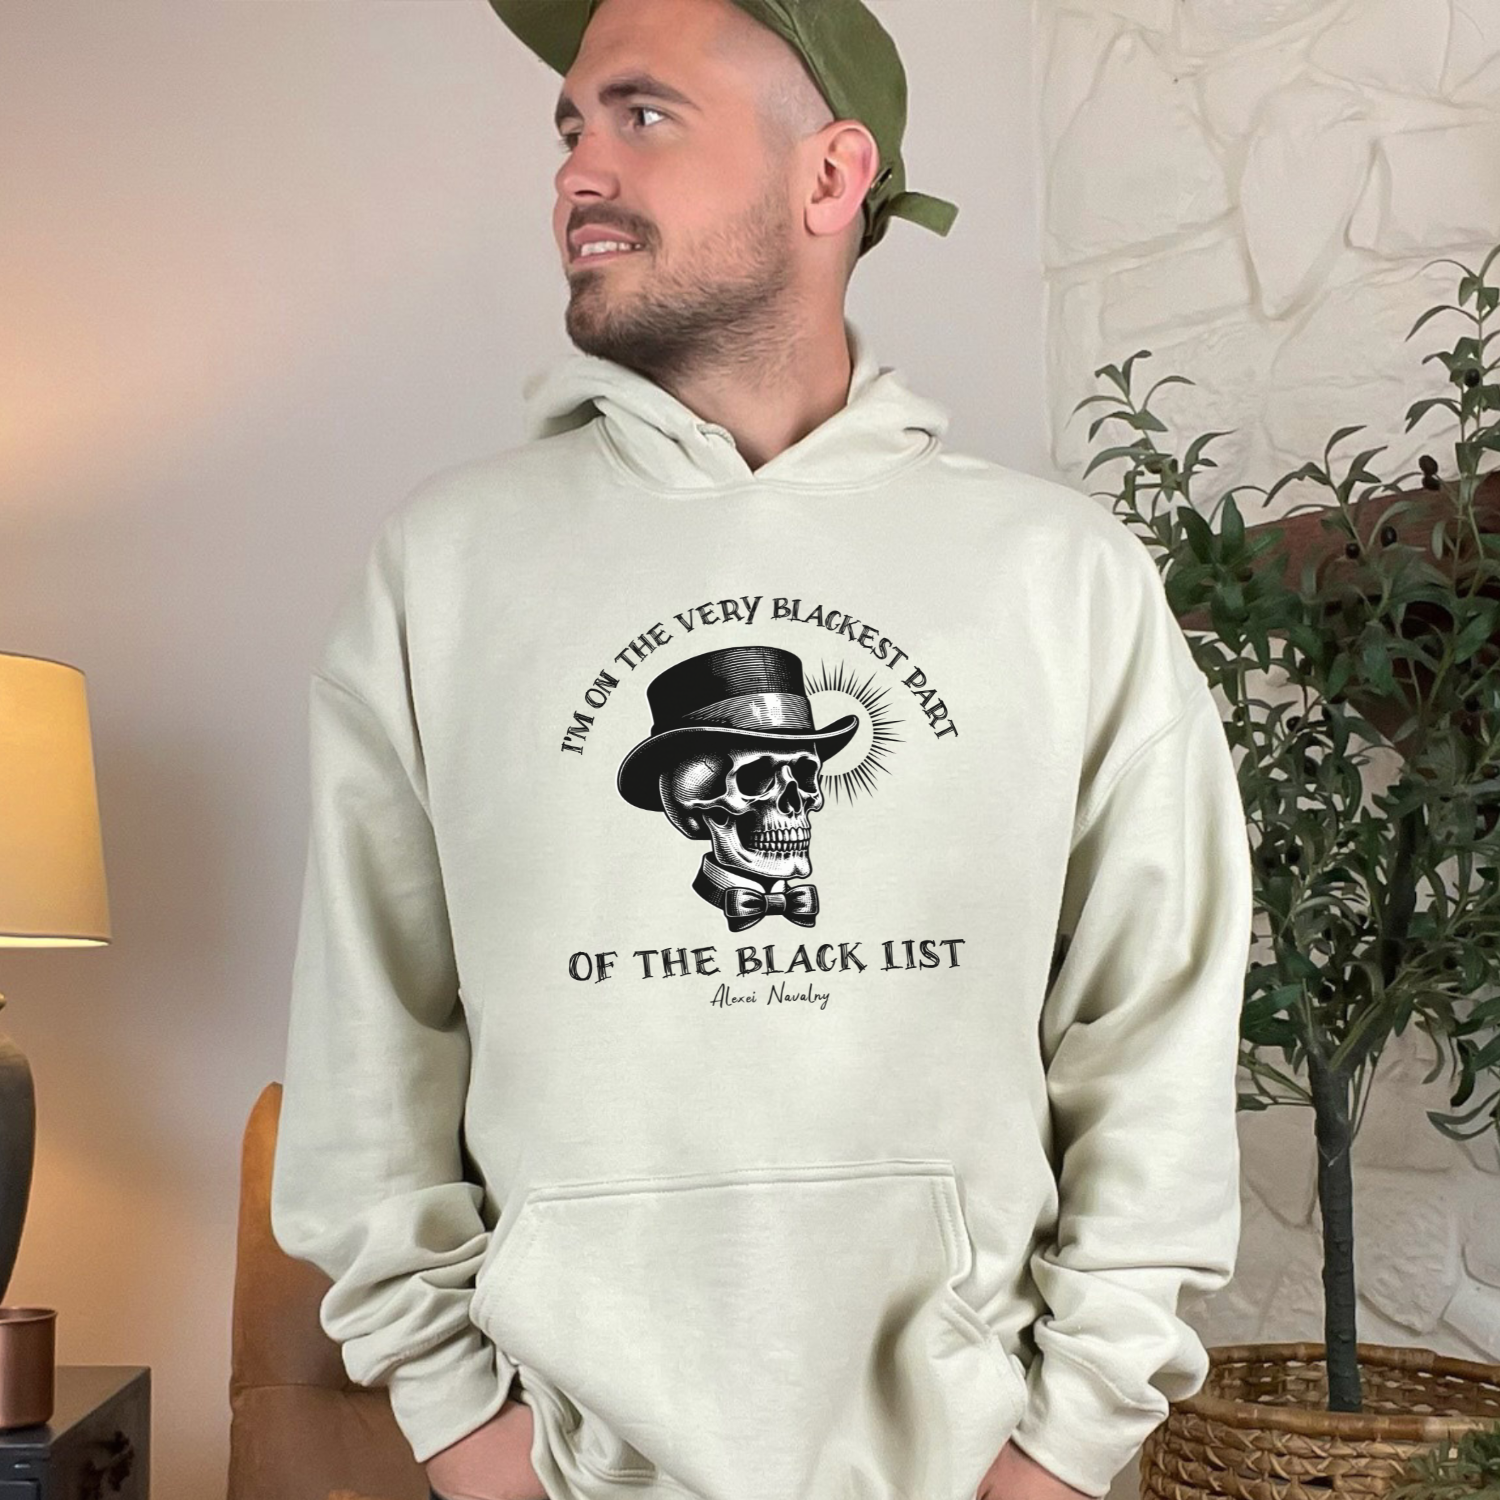 A sand colored hoodie, adorned with Navalny's quote "I'm on the very blackest part of the black list", stands to embody the spirit of defiance and the quest for political freedom.